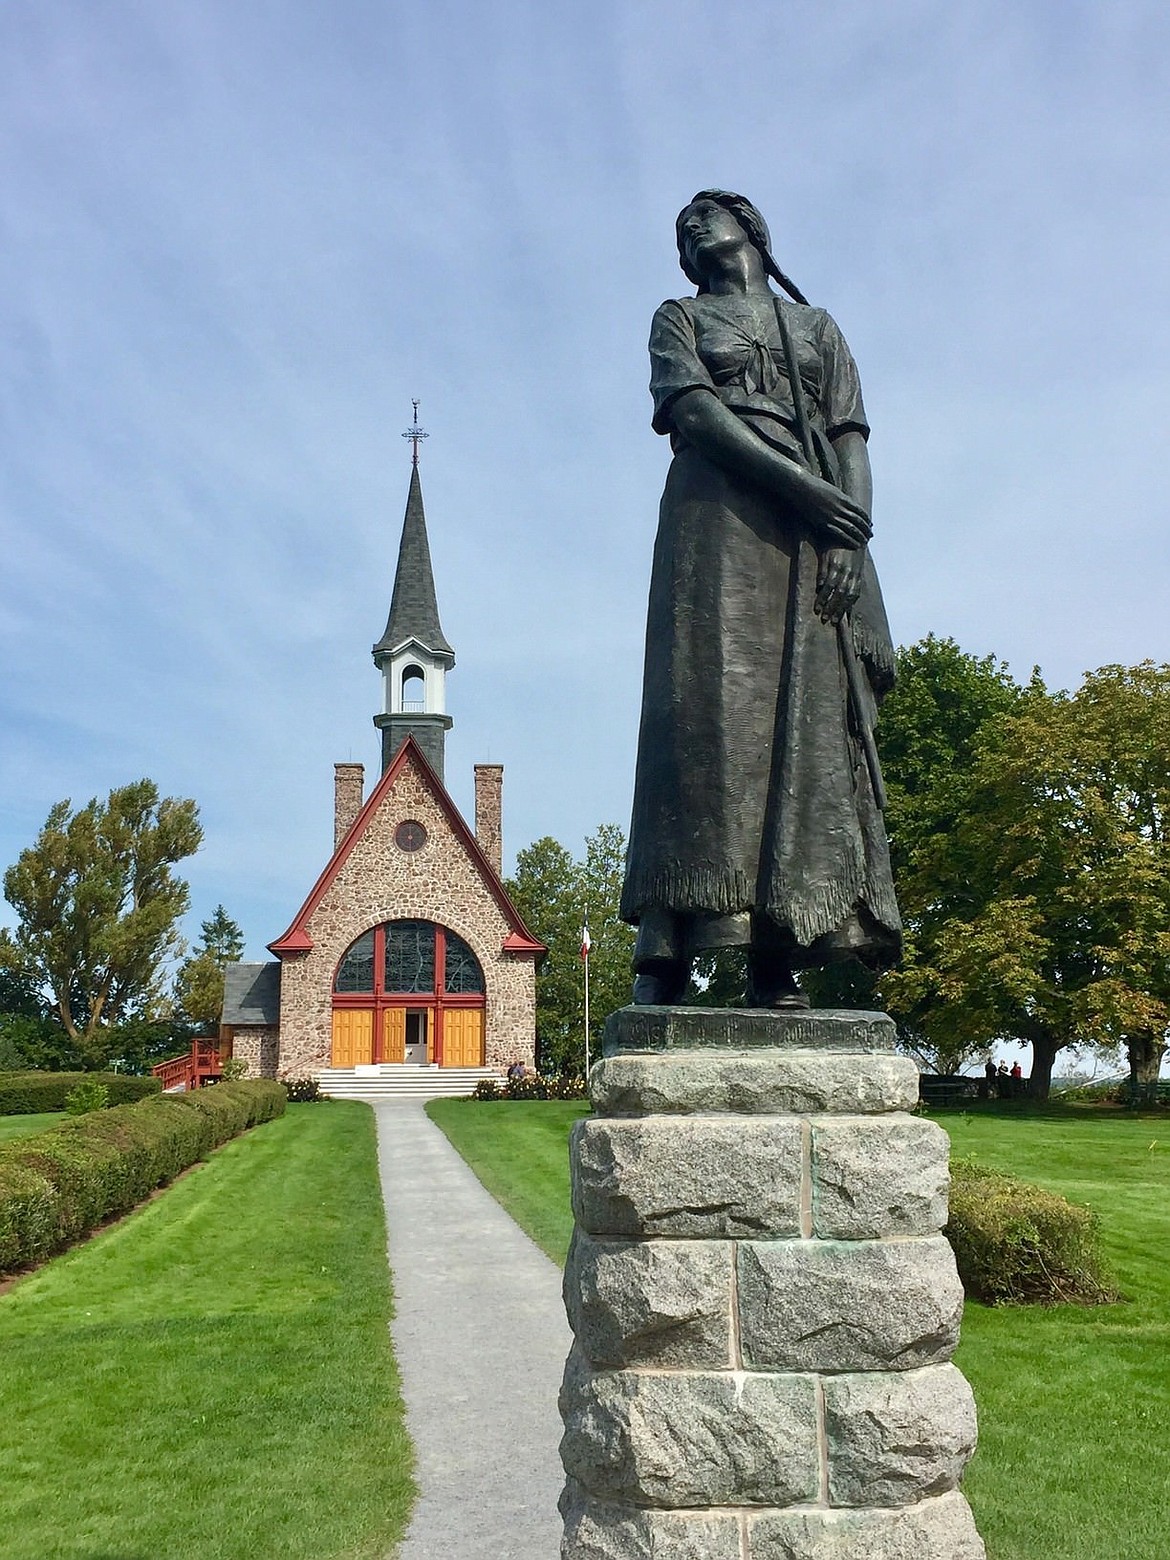 TROVER.COM
Statue of Evangeline at Grand-Pré National Historic Site, Nova Scotia; fictional Arcadian heroine in Henry Wadsworth Longfellow’s epic poem about her searching for her true love, lost when they were separated at the deportation by the British.